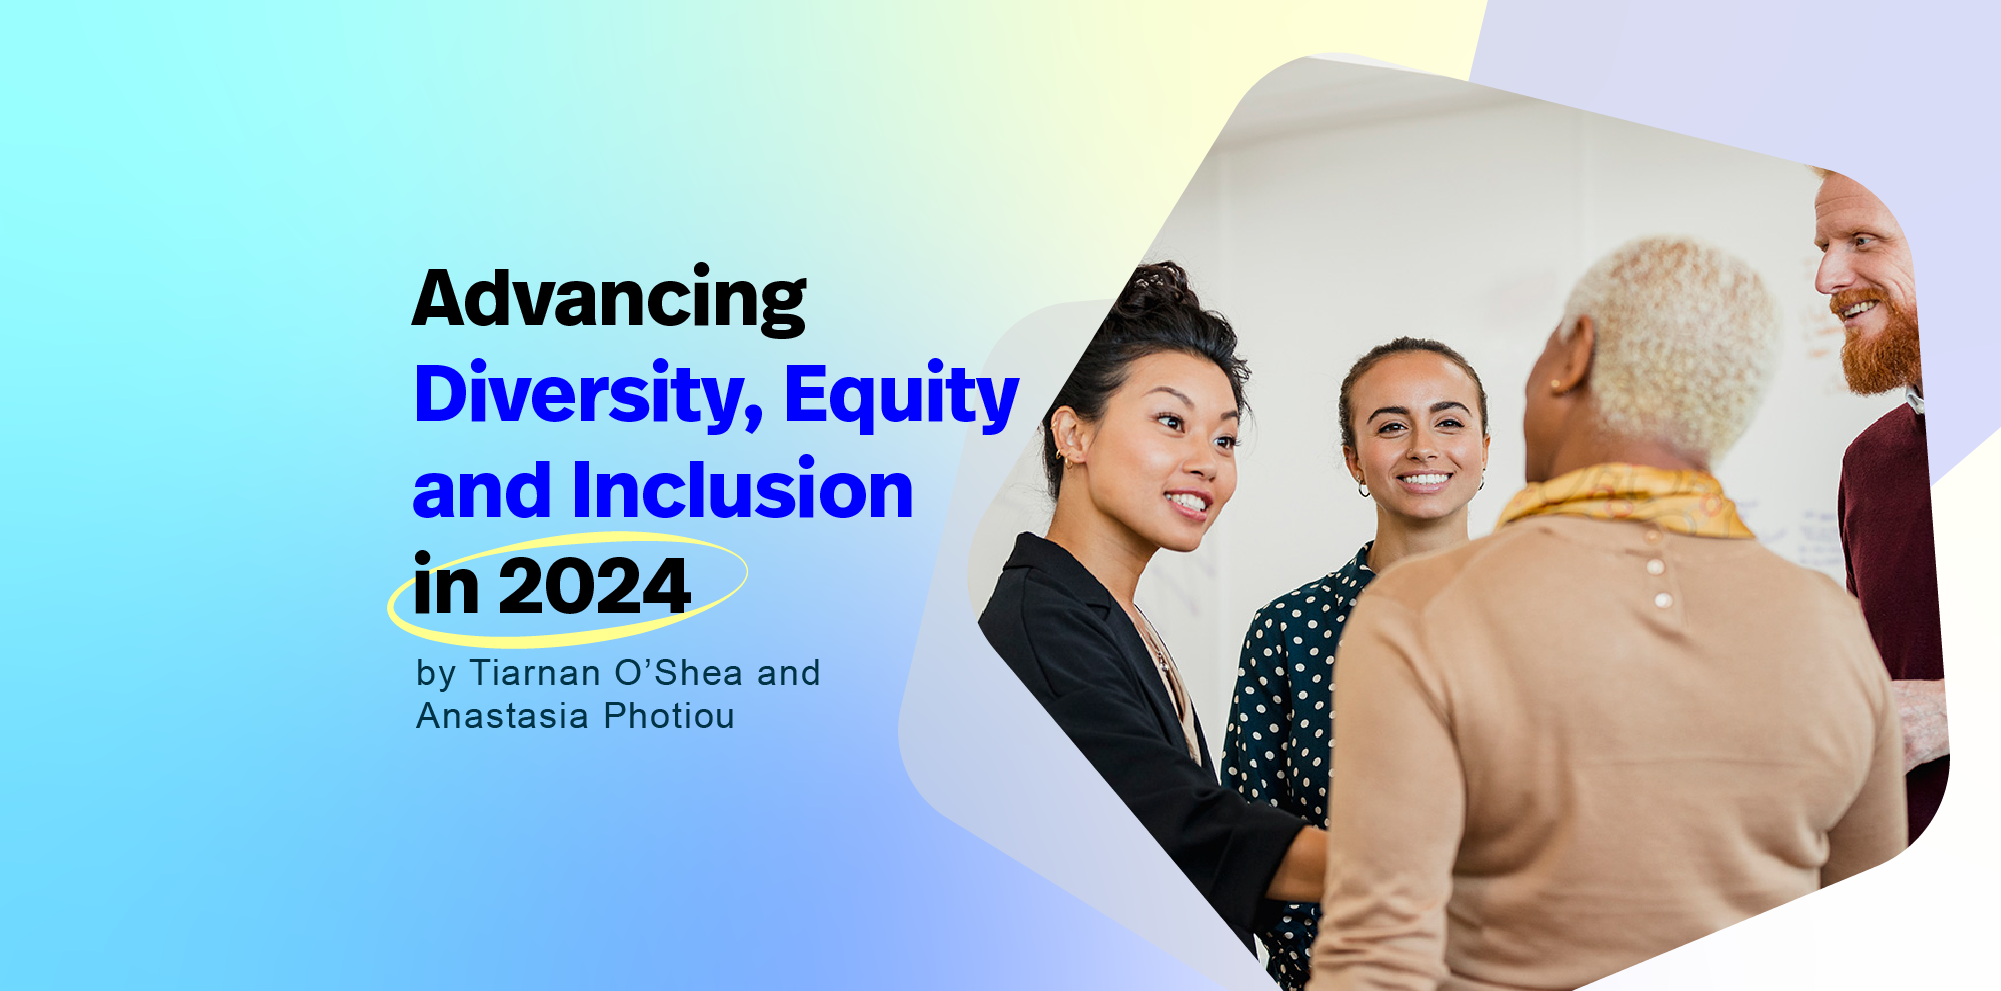 Advancing Diversity, Equity and Inclusion in 2024